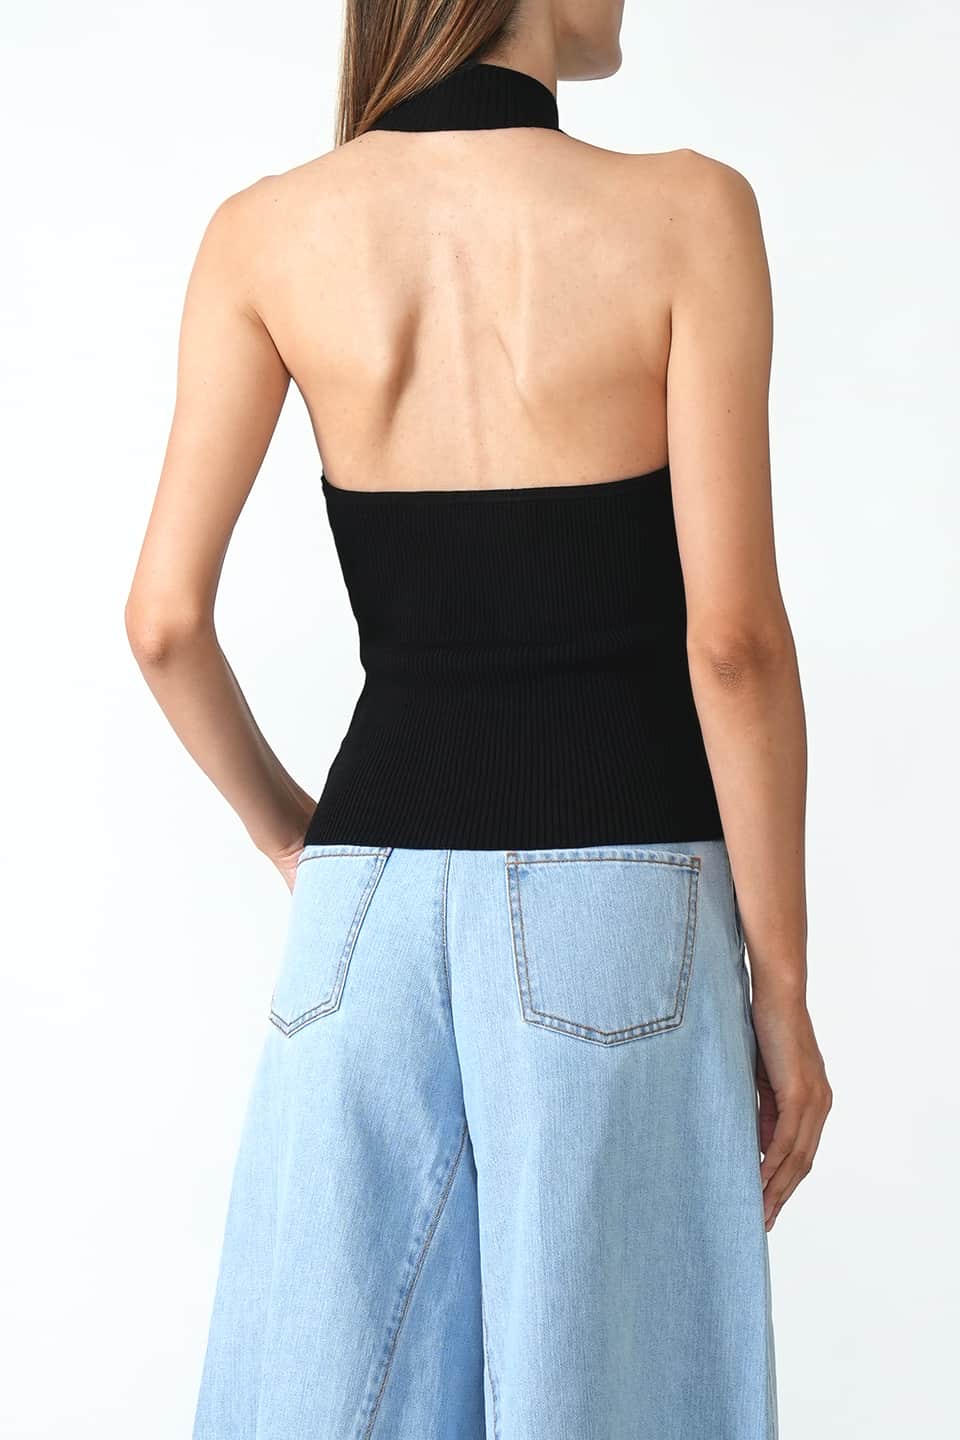 Thumbnail for Product gallery 6, Backless Stretch Top Black